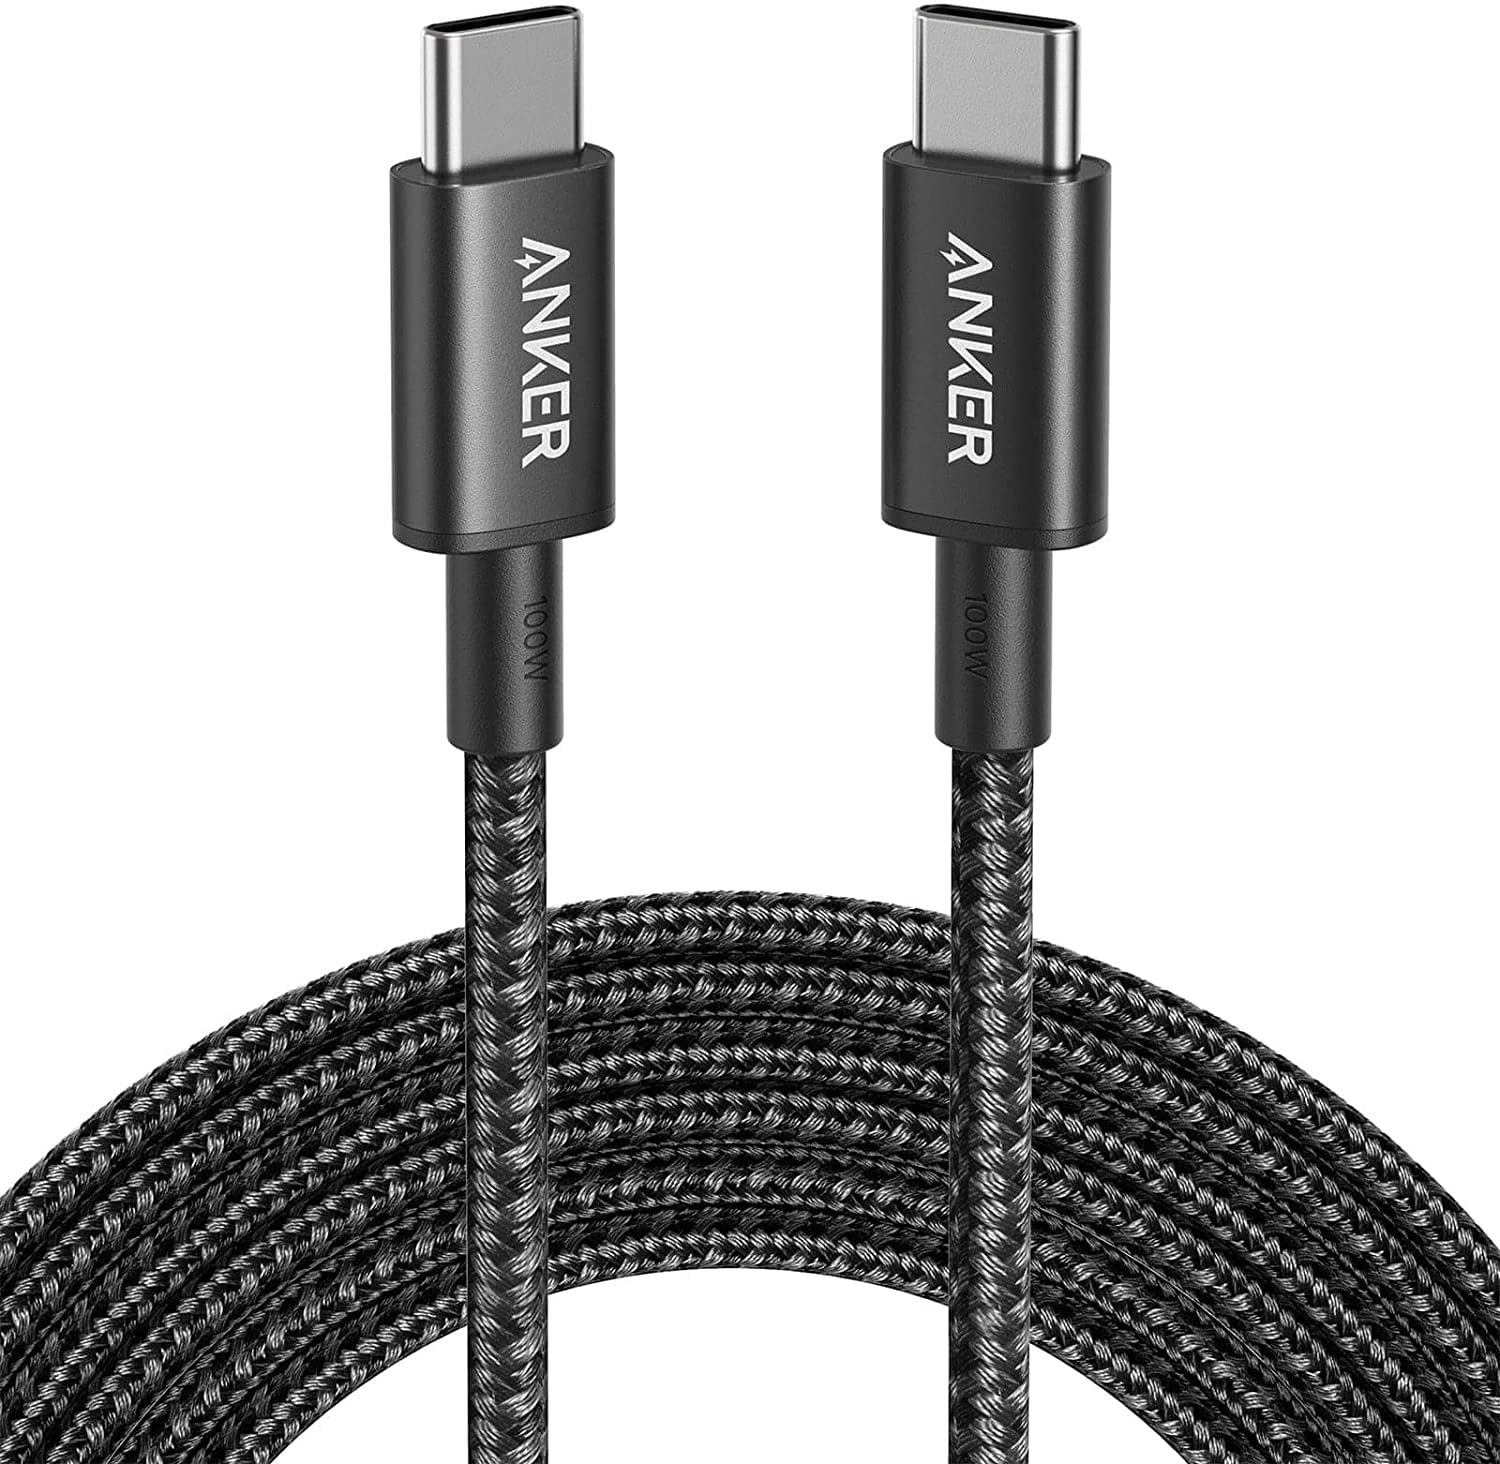  Juiced Systems Lifeline Essential USB-C to USB-C Cable, USB-A  to USB-C Nylon Braided Power Data Cable, 3M, 10FT, 10 Gbps Rated